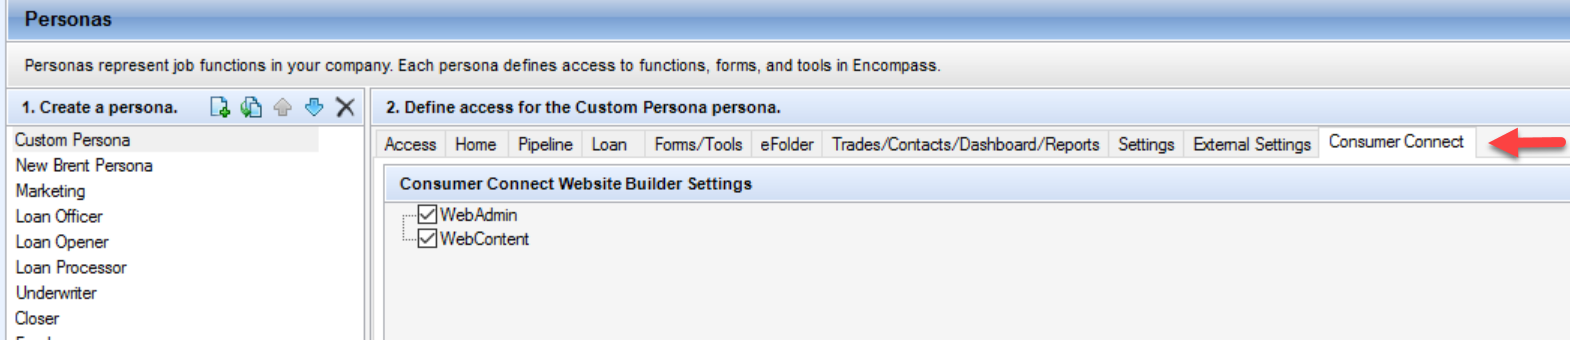 See Encompass Setting Help  (<F1> from this page) for additional details